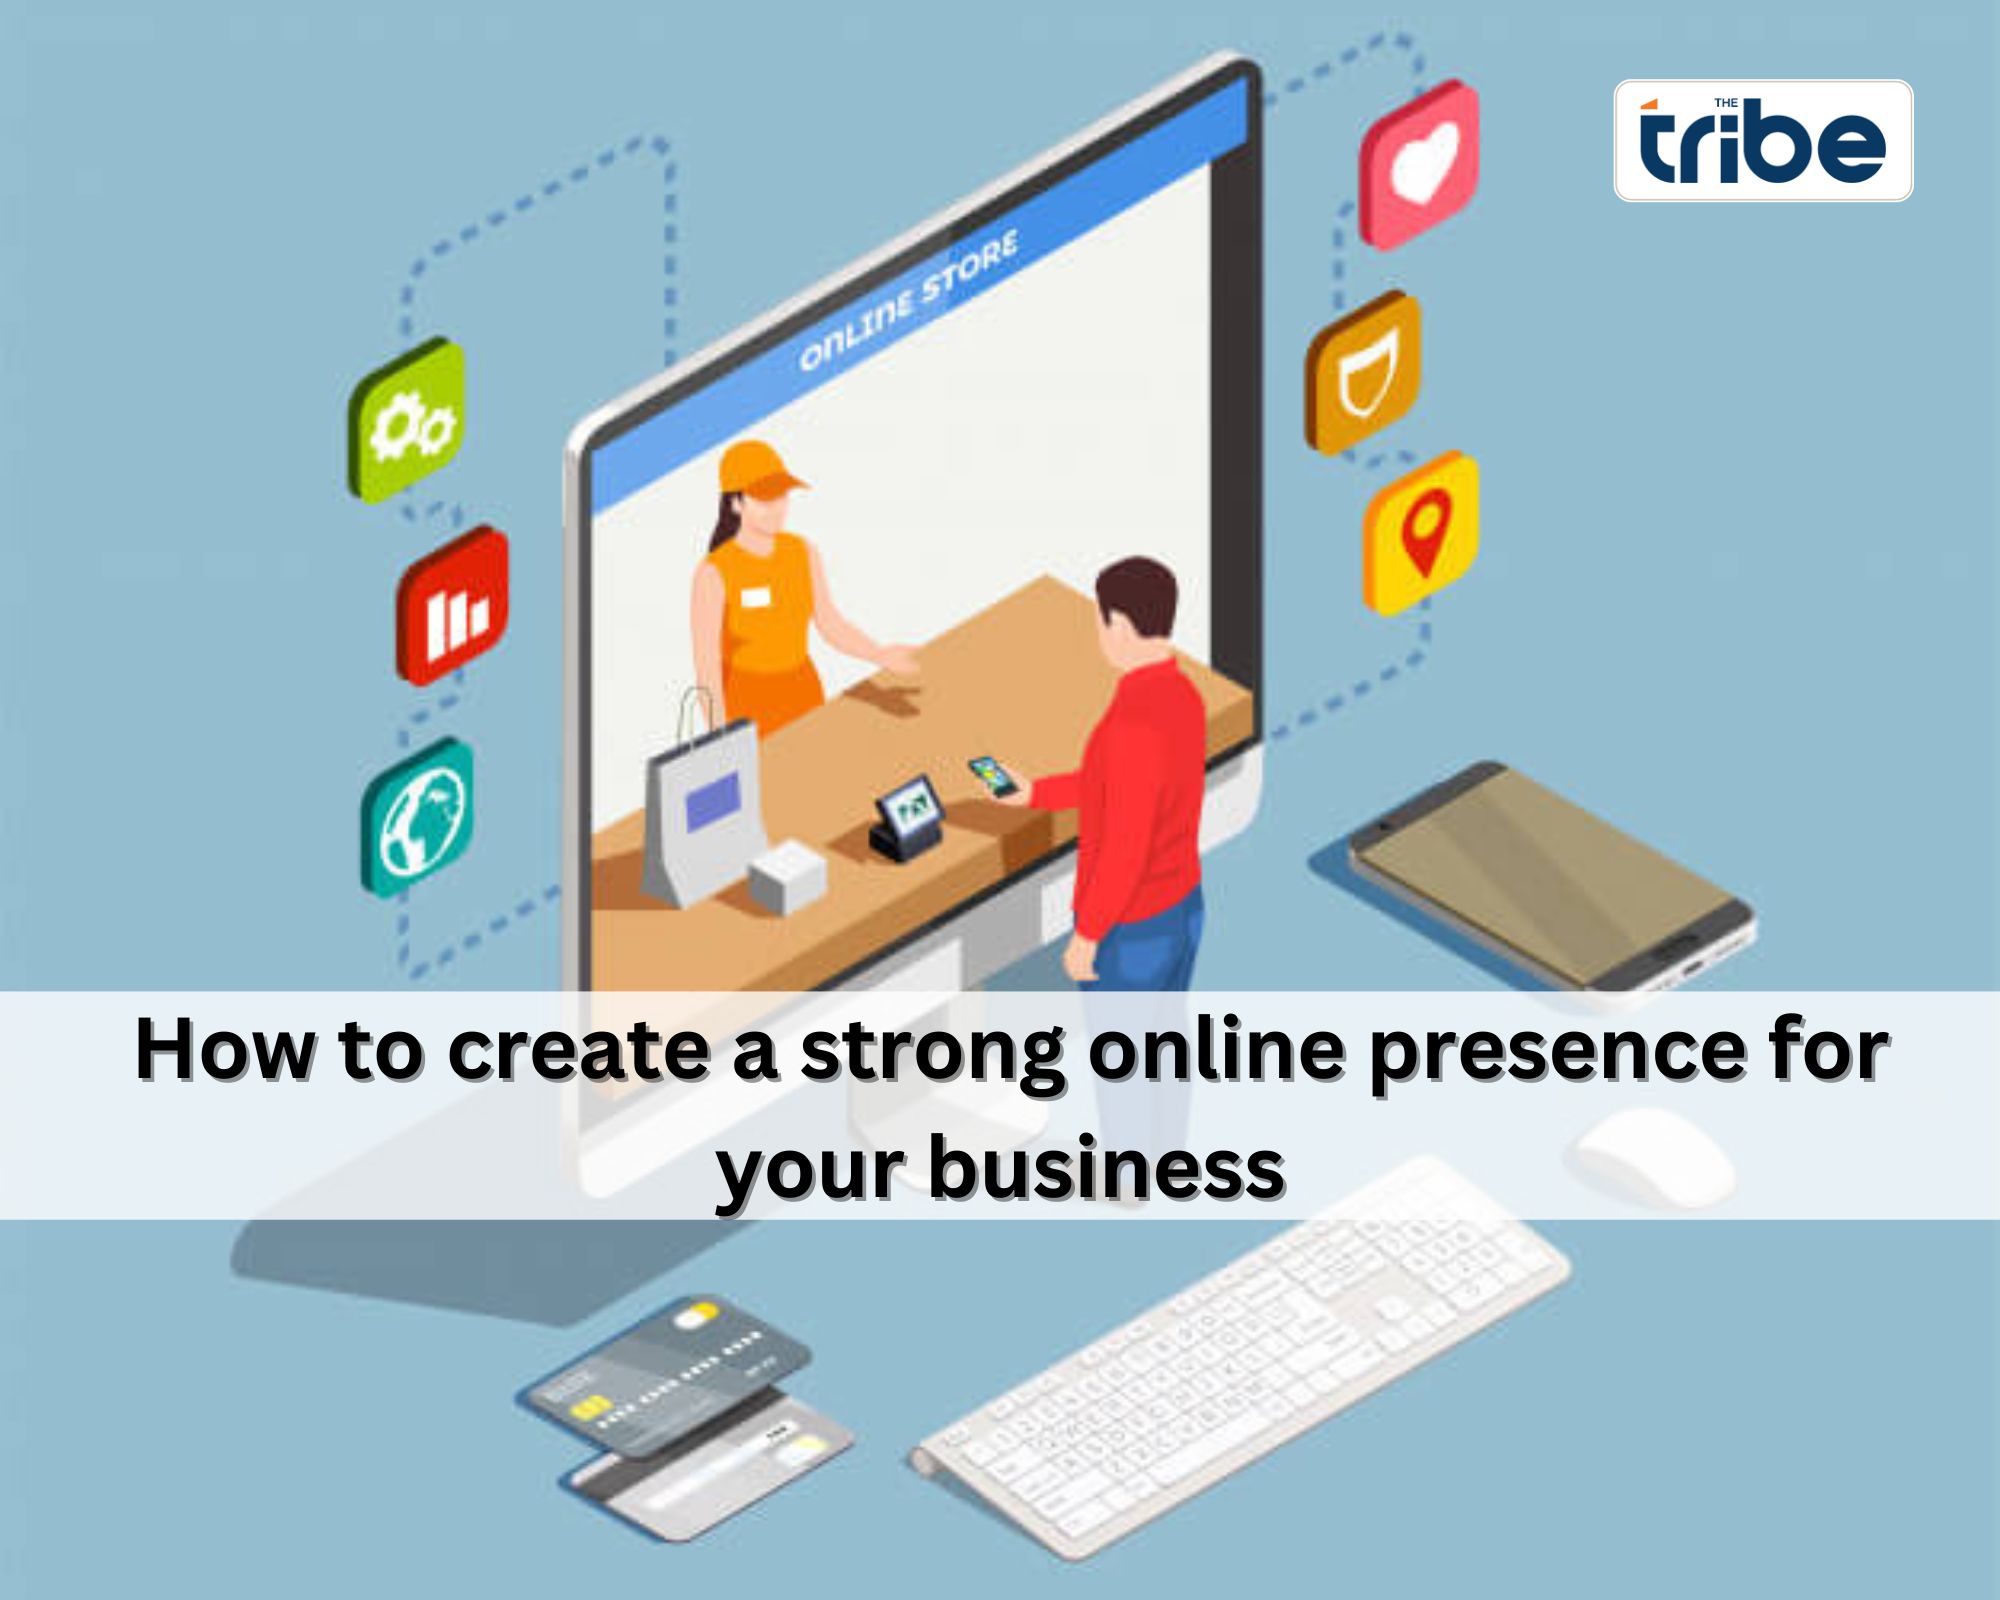 How to create a strong online presence for your business